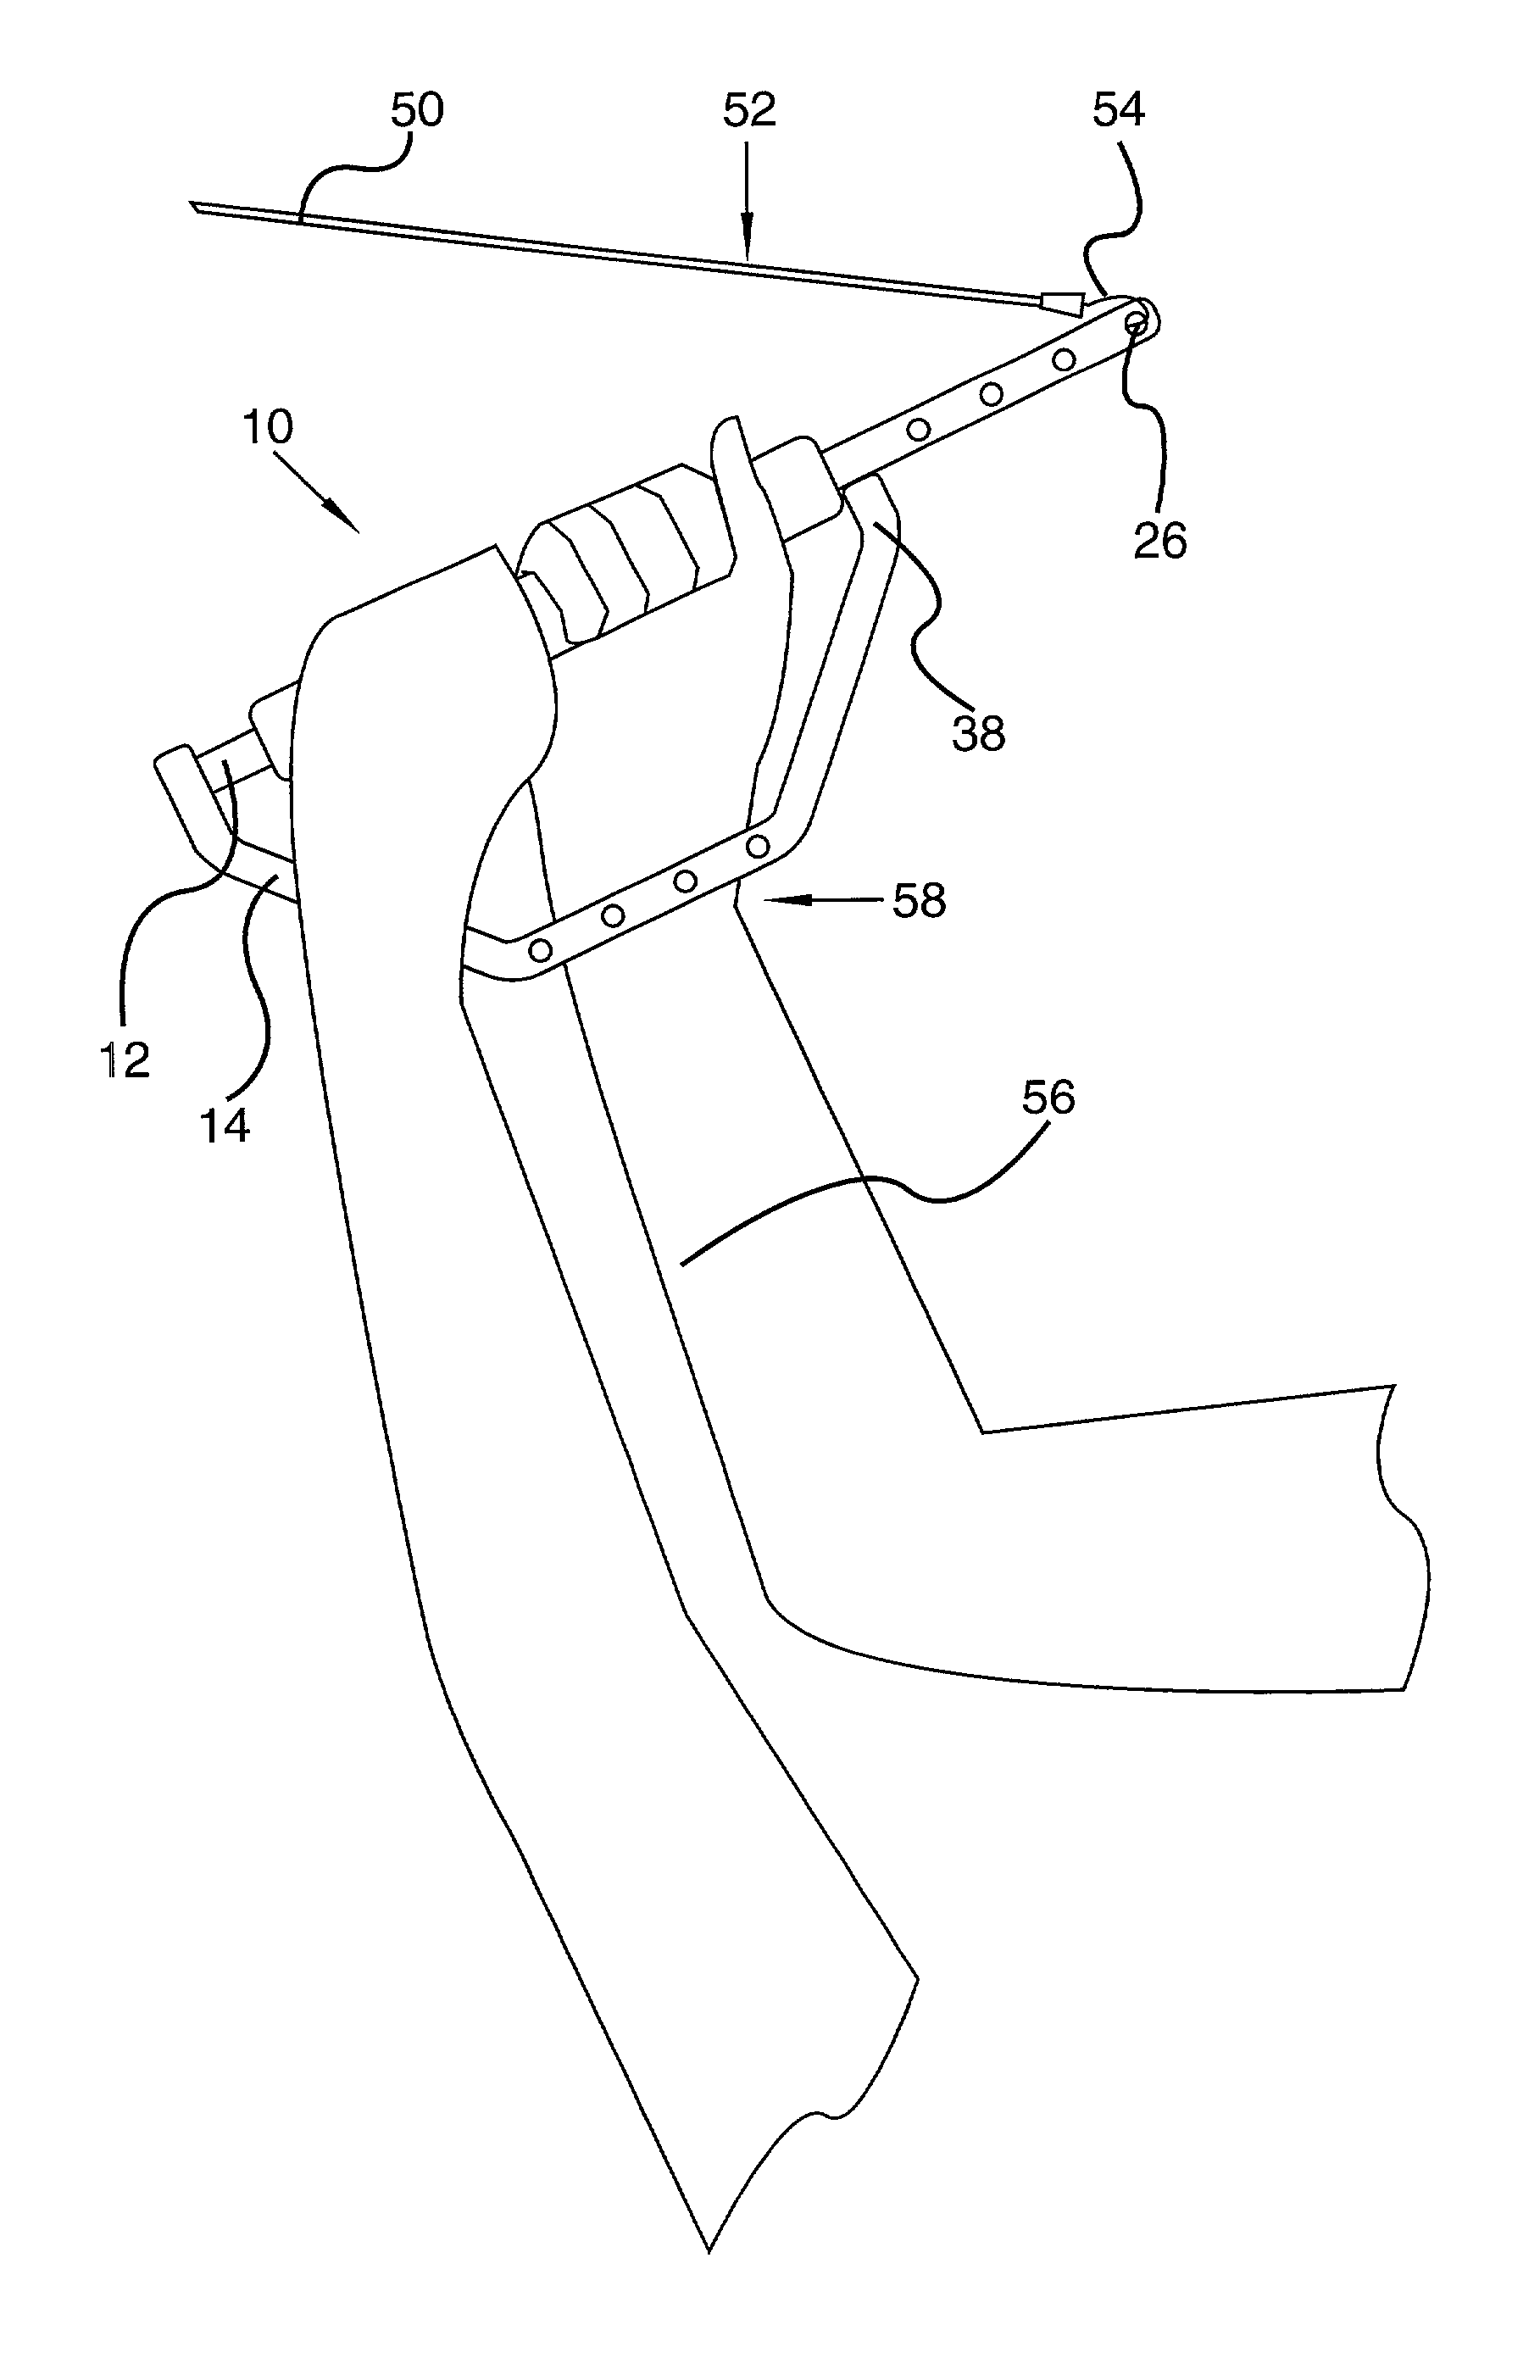 Muscle training and development device